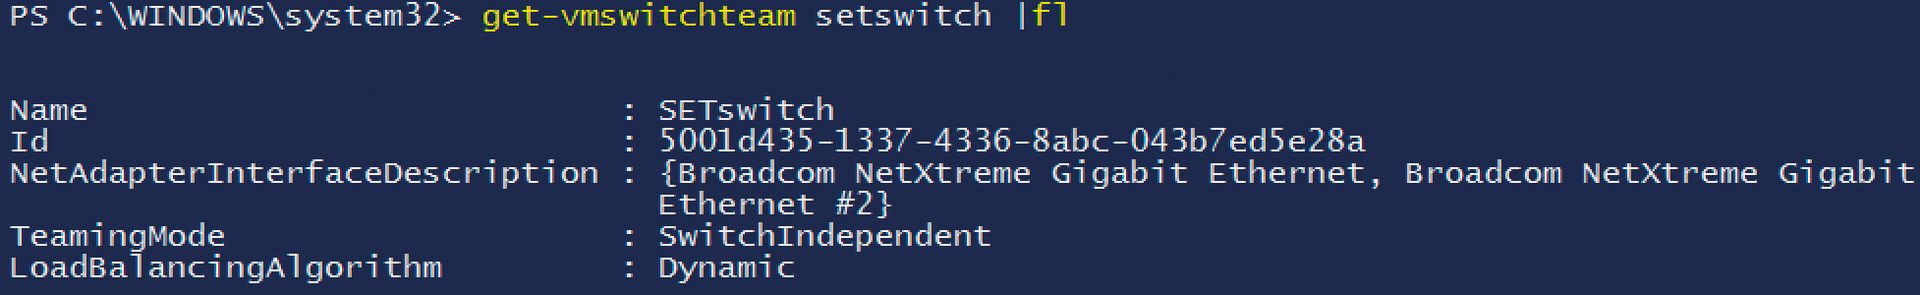 Retrieving information about SET in PowerShell. 